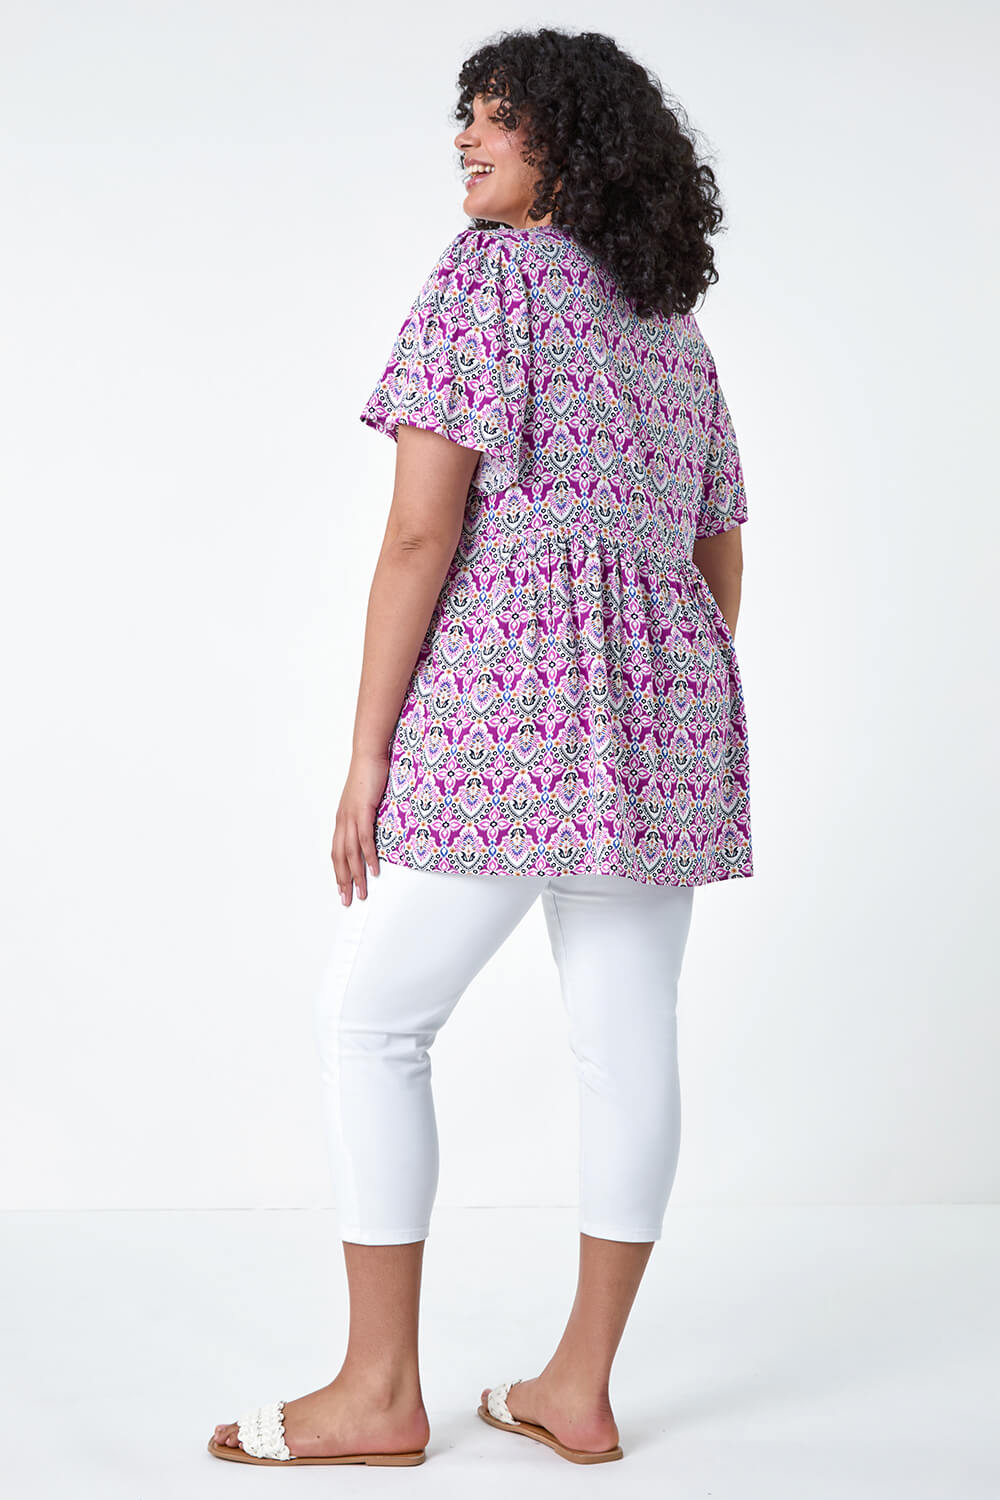 Purple Curve Tie Front Boho Printed Top, Image 3 of 5